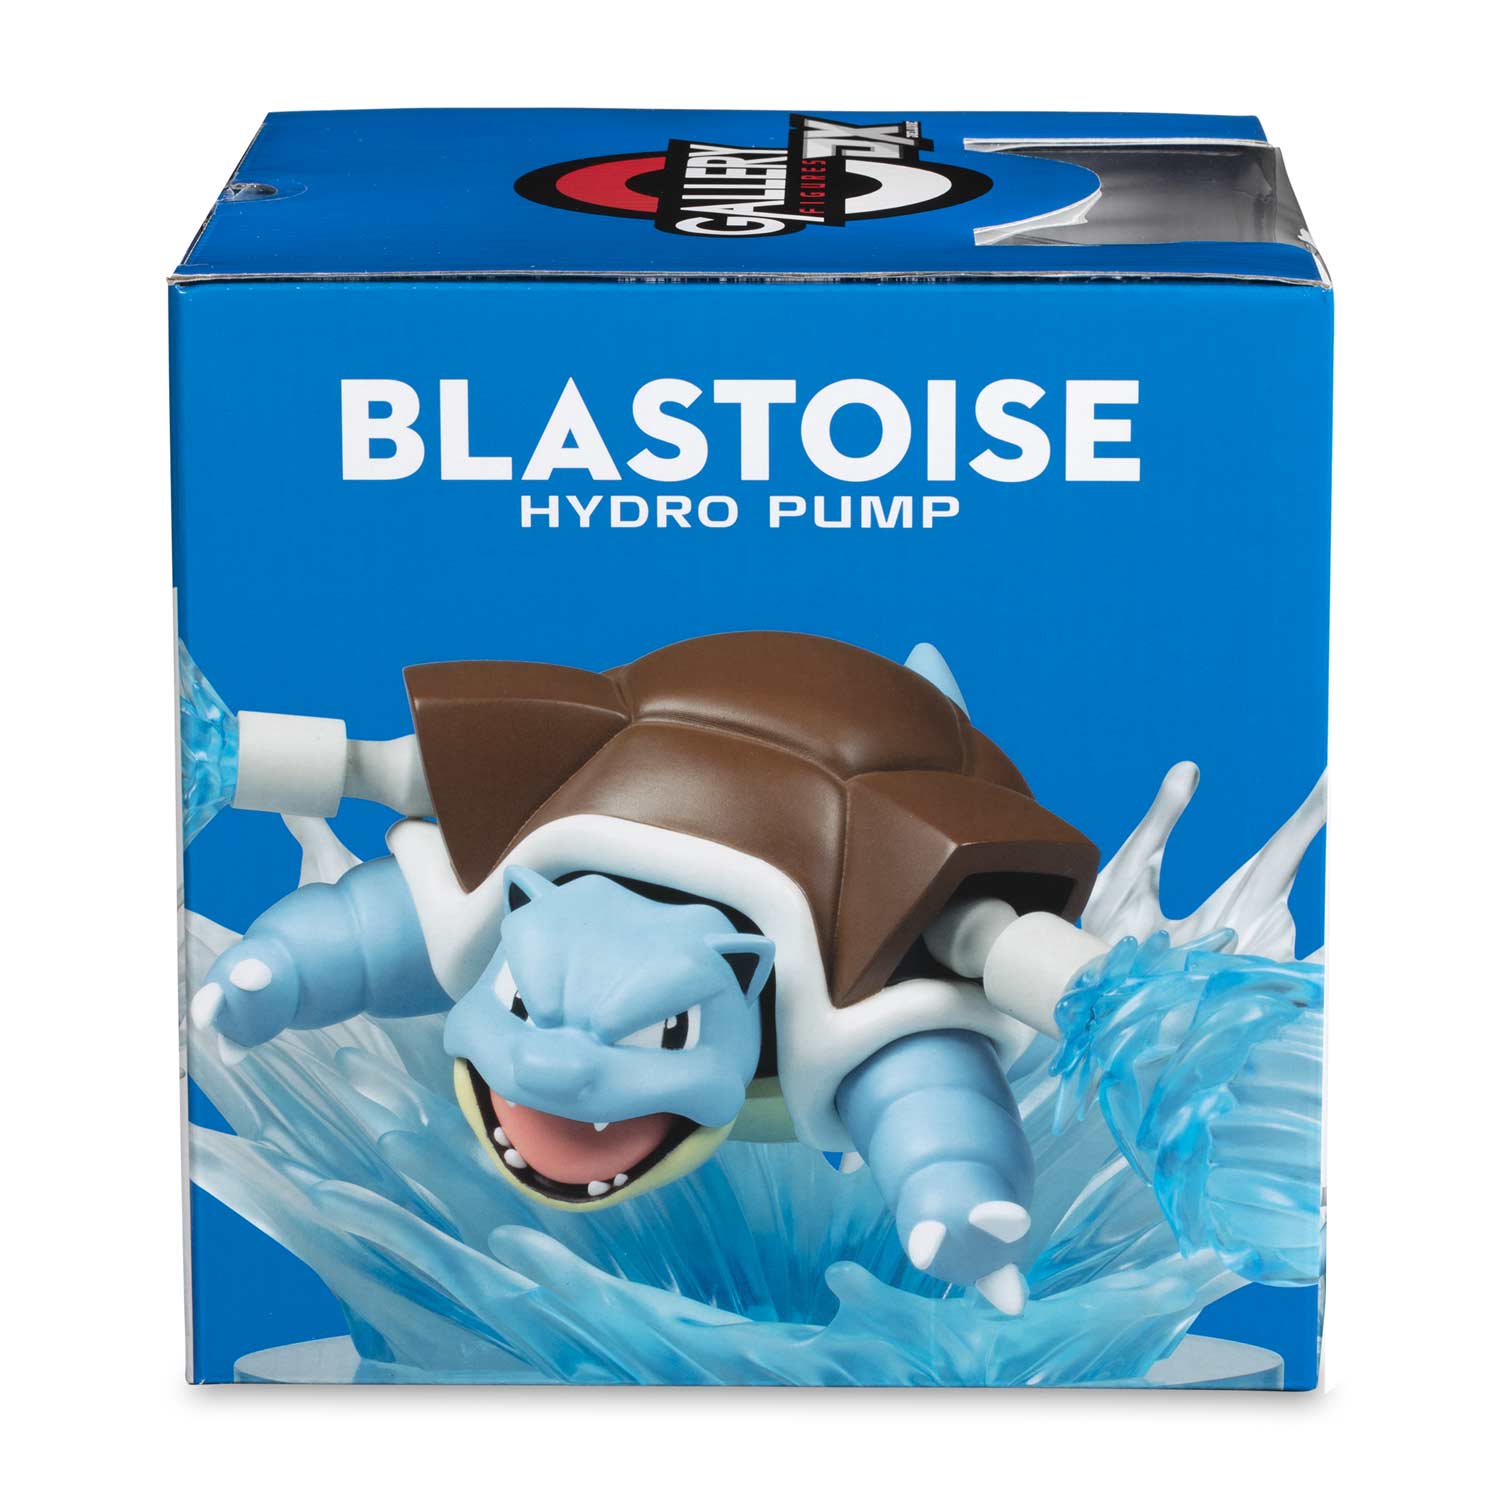 Official Pokémon Gallery Figure DX with Blastoise showing off a powerful Hy...